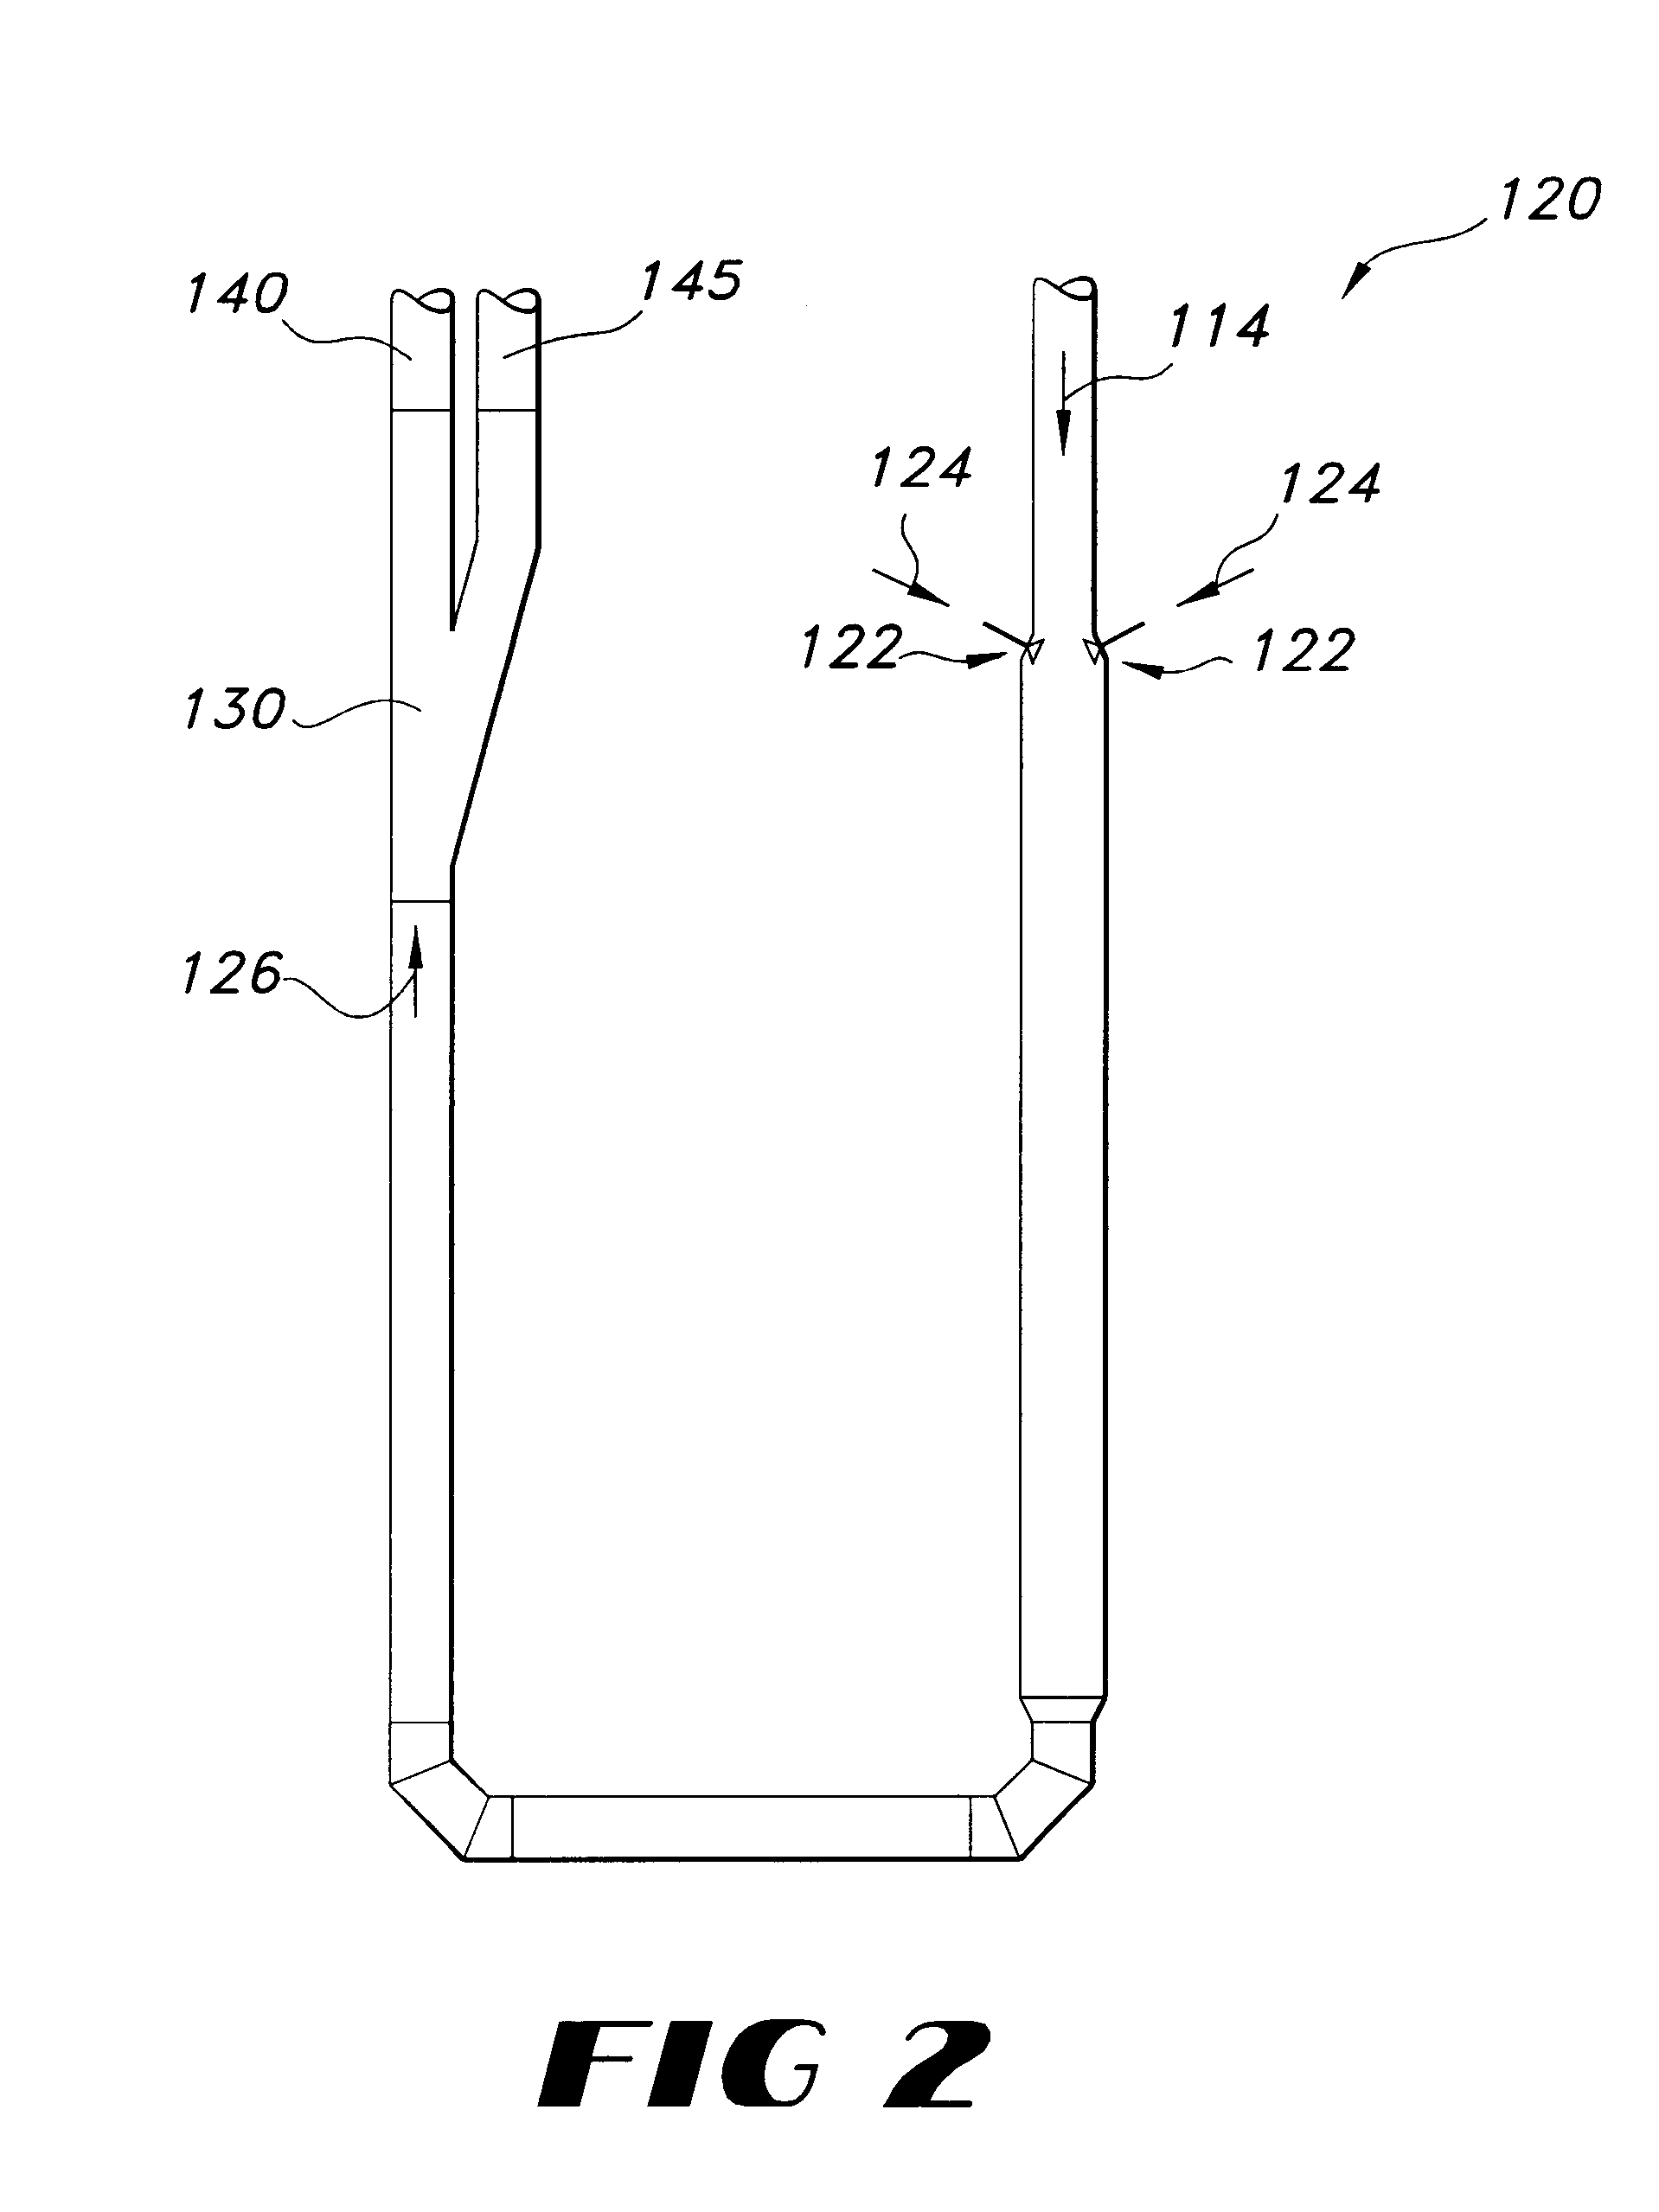 Method and system for producing prescription animal bedding from recycled paper waste products